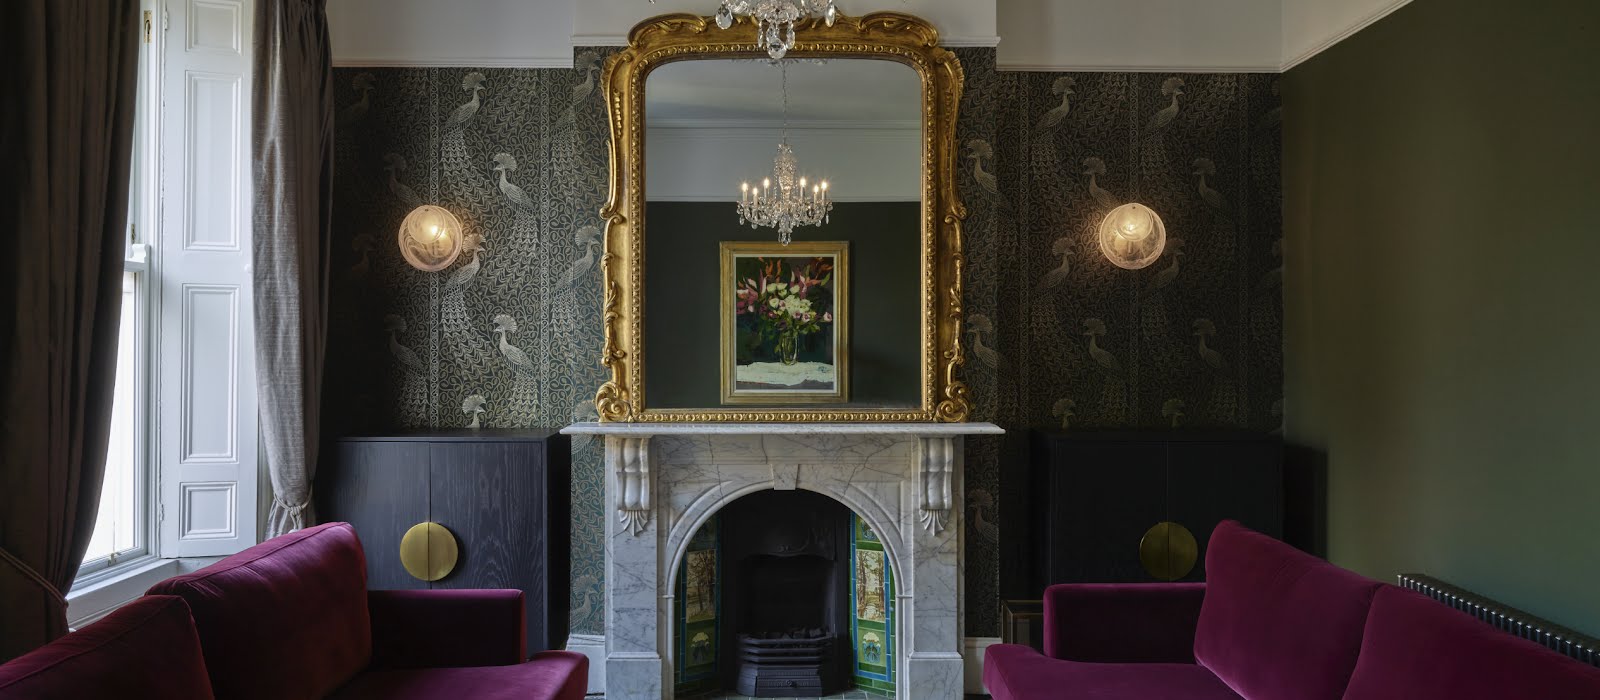 Before and after: this Victorian Rathgar home has been transformed into a sumptuous, jewel-toned dream